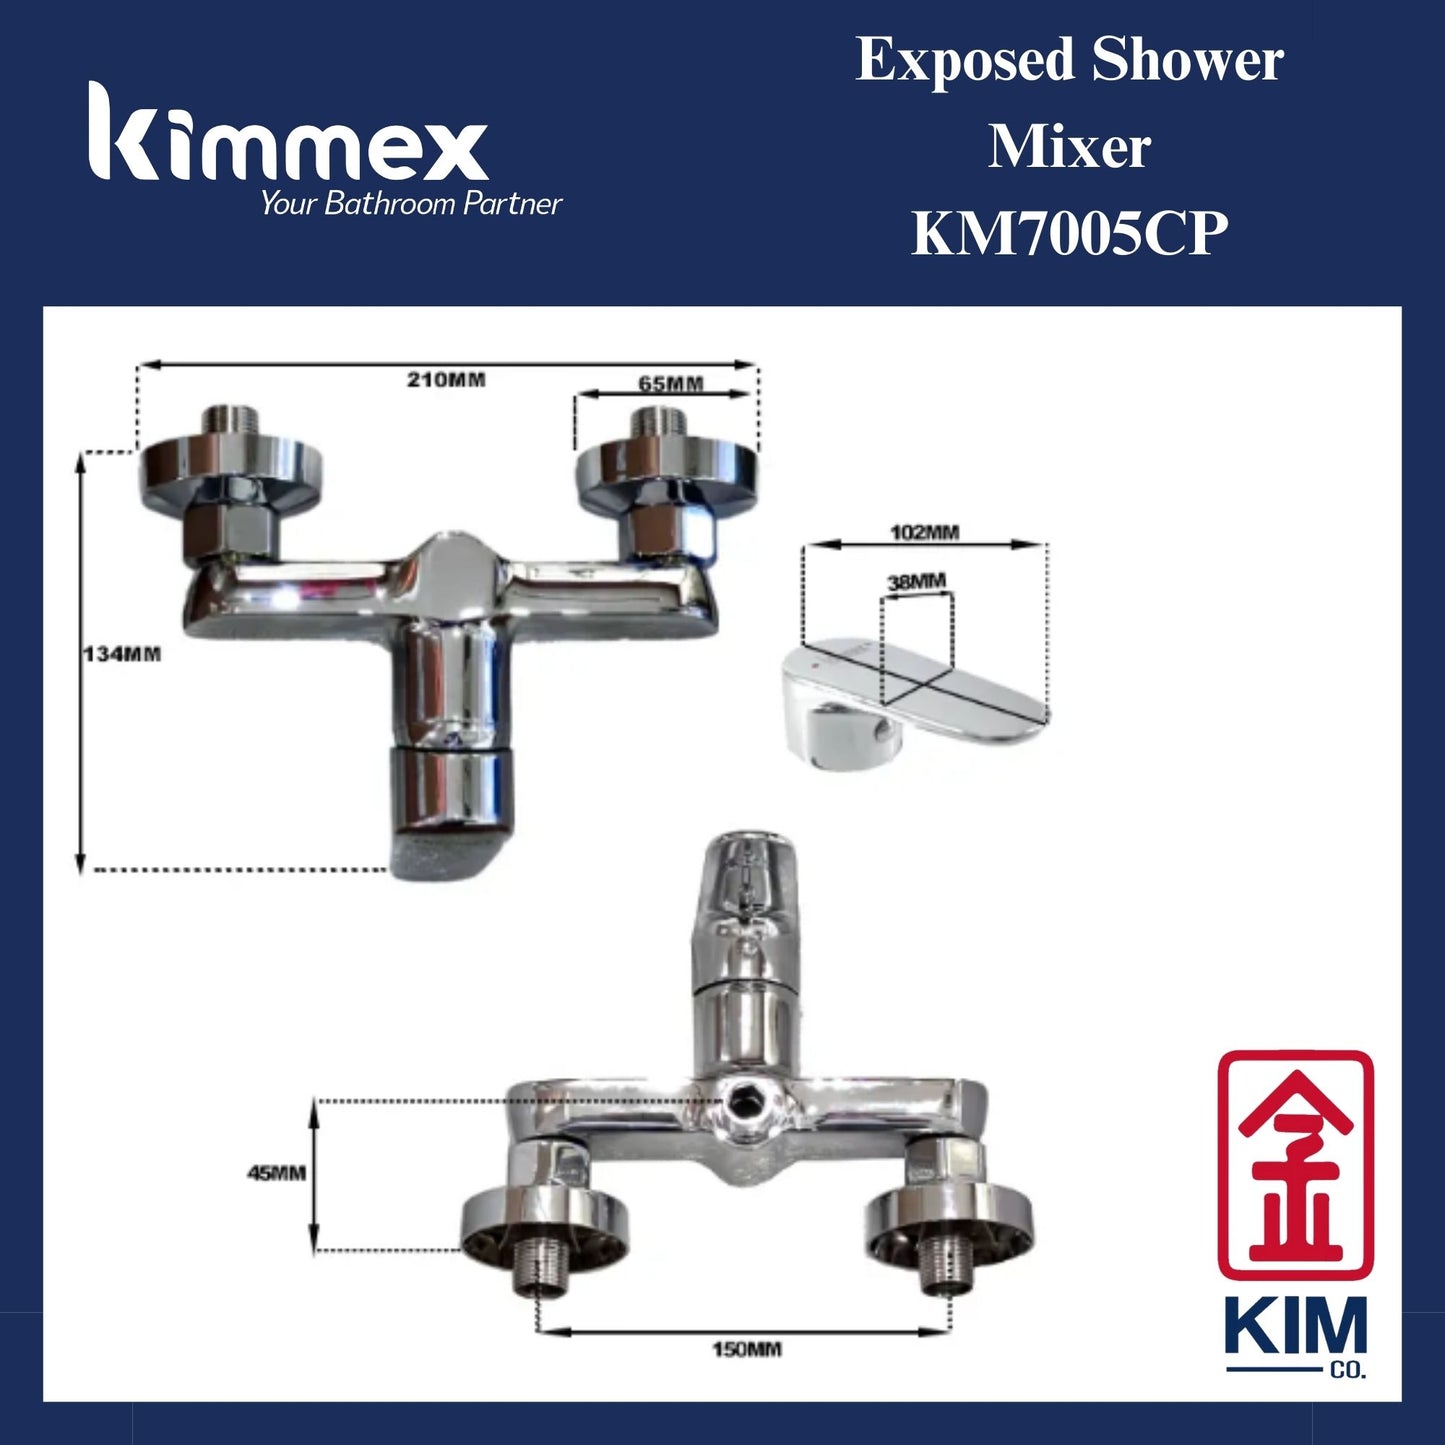 kimmex A Series Exposed Shower Mixer Without Shower Kit (KM7005CP)